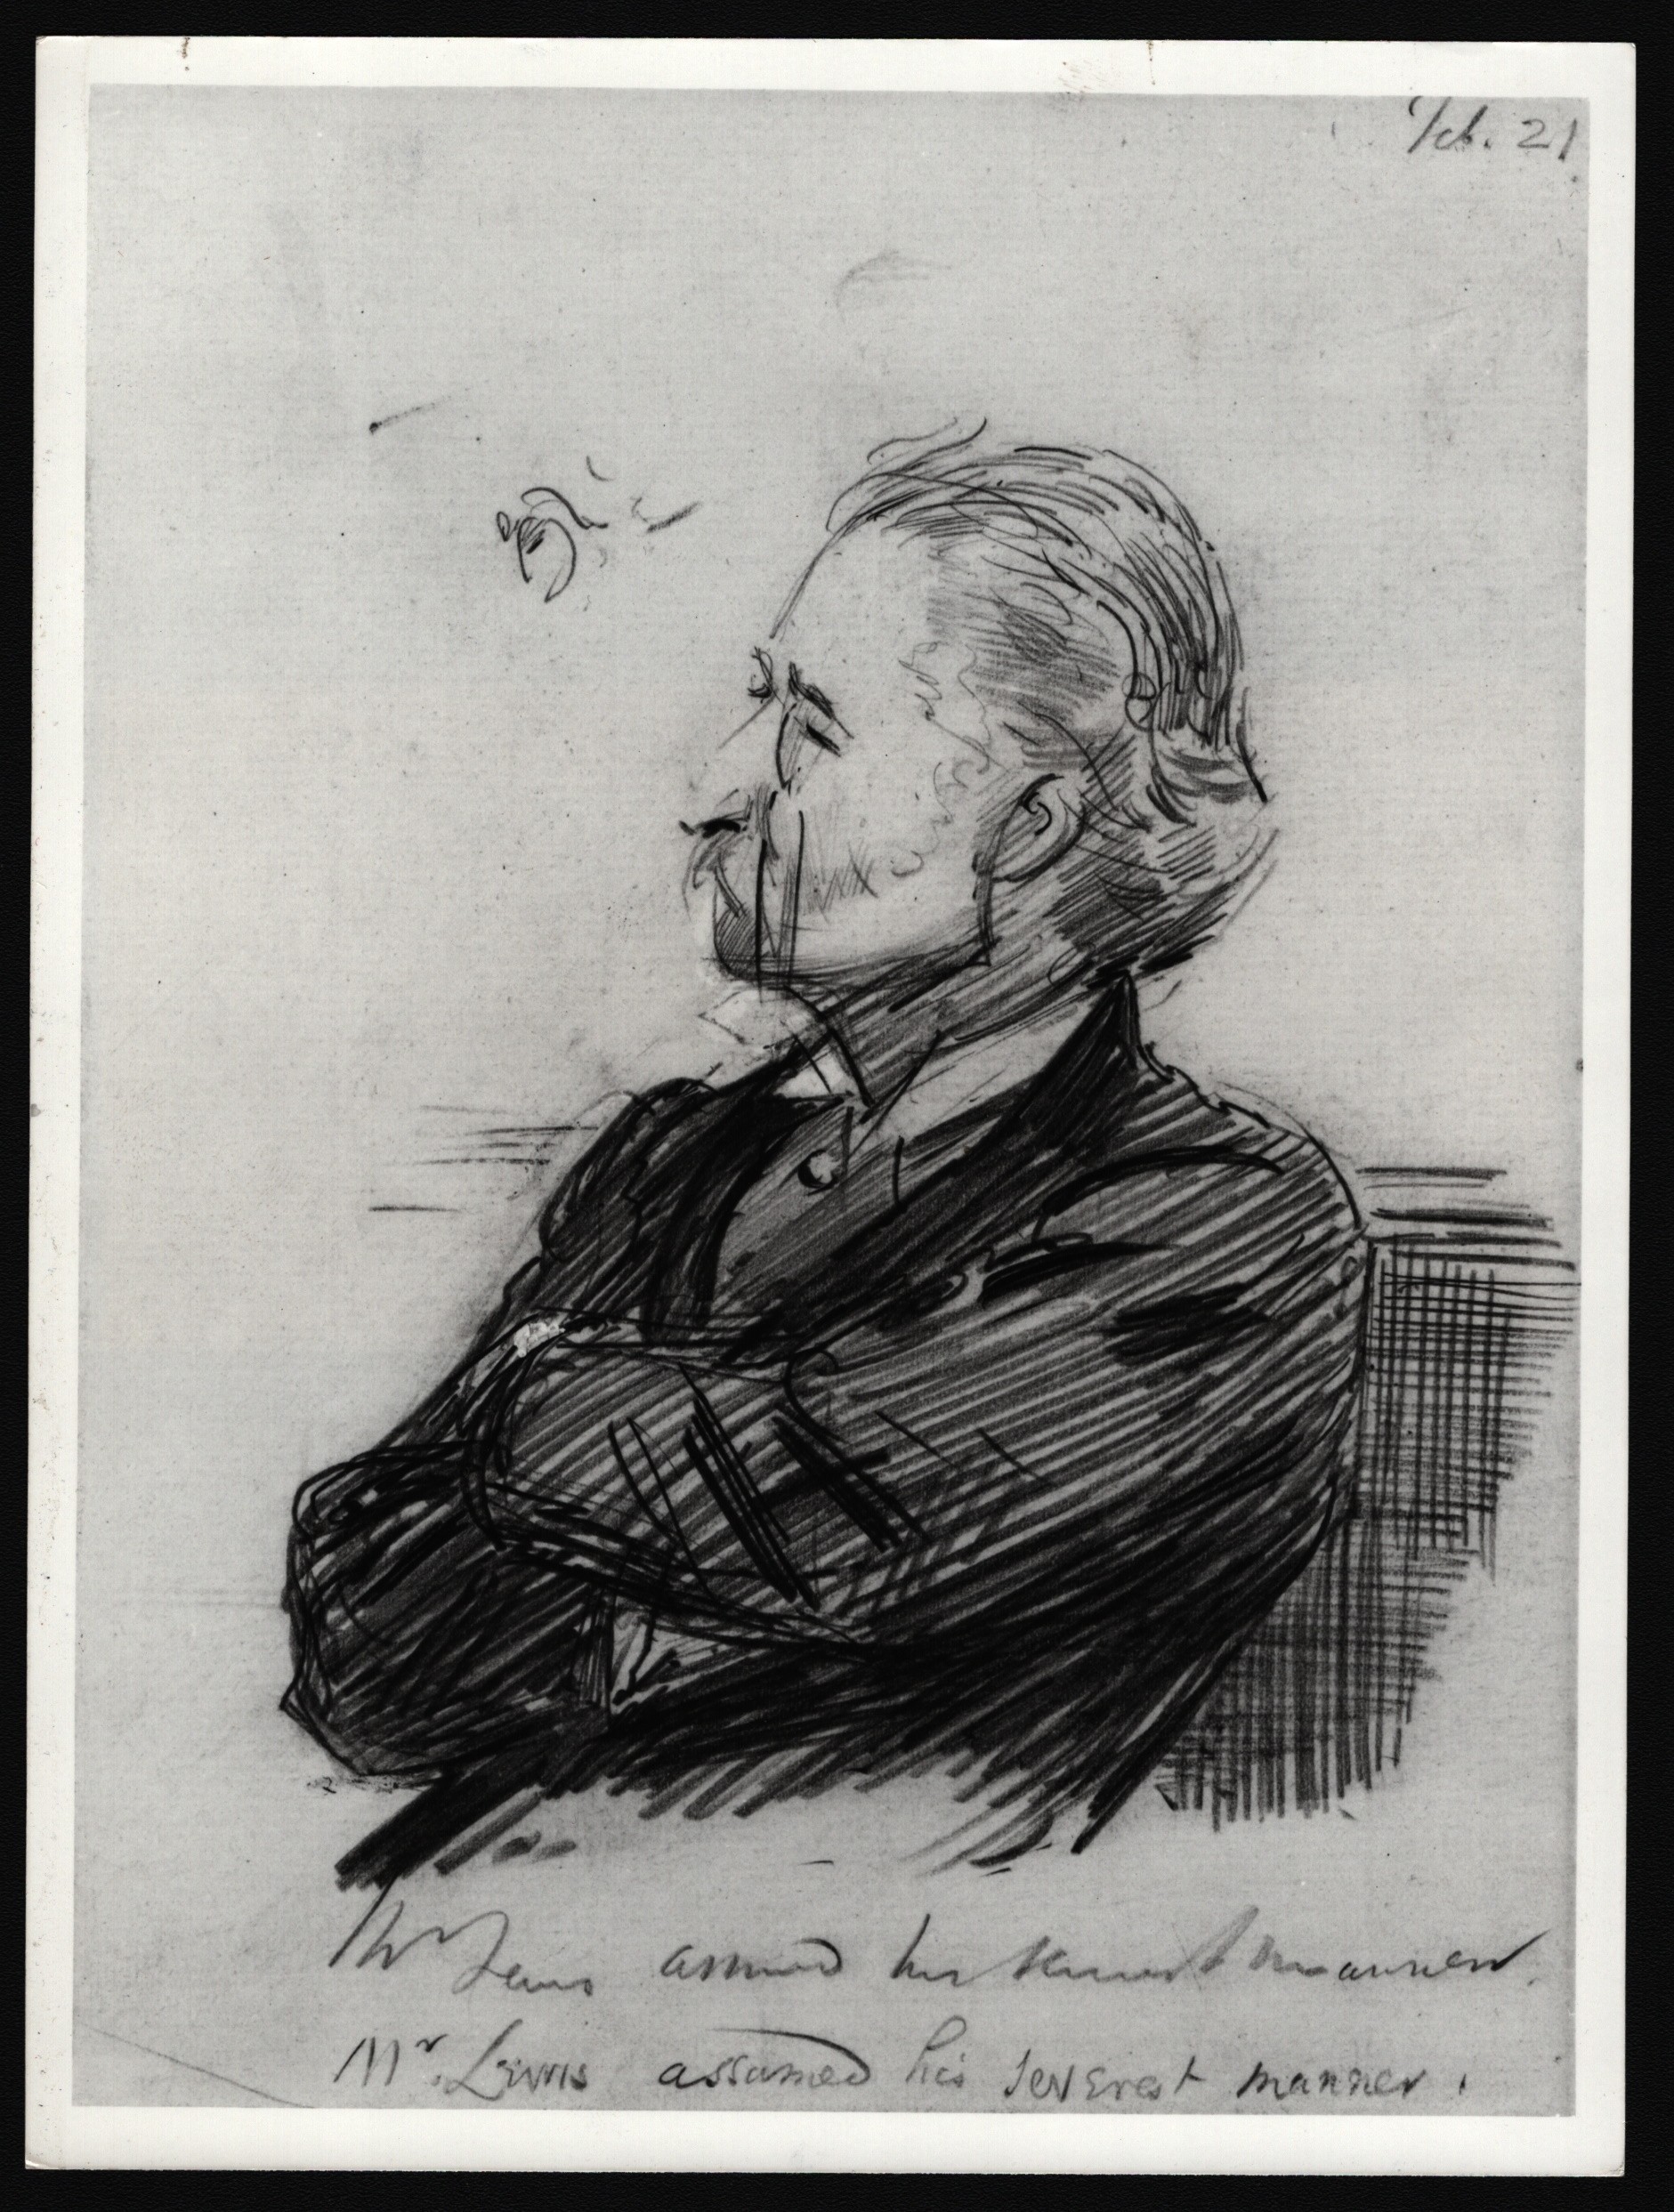 PHOTOGRAPH OF DRAWING OF SIR G.H. LEWIS FOR NATIONAL PORTRAIT GALLERY LONDON